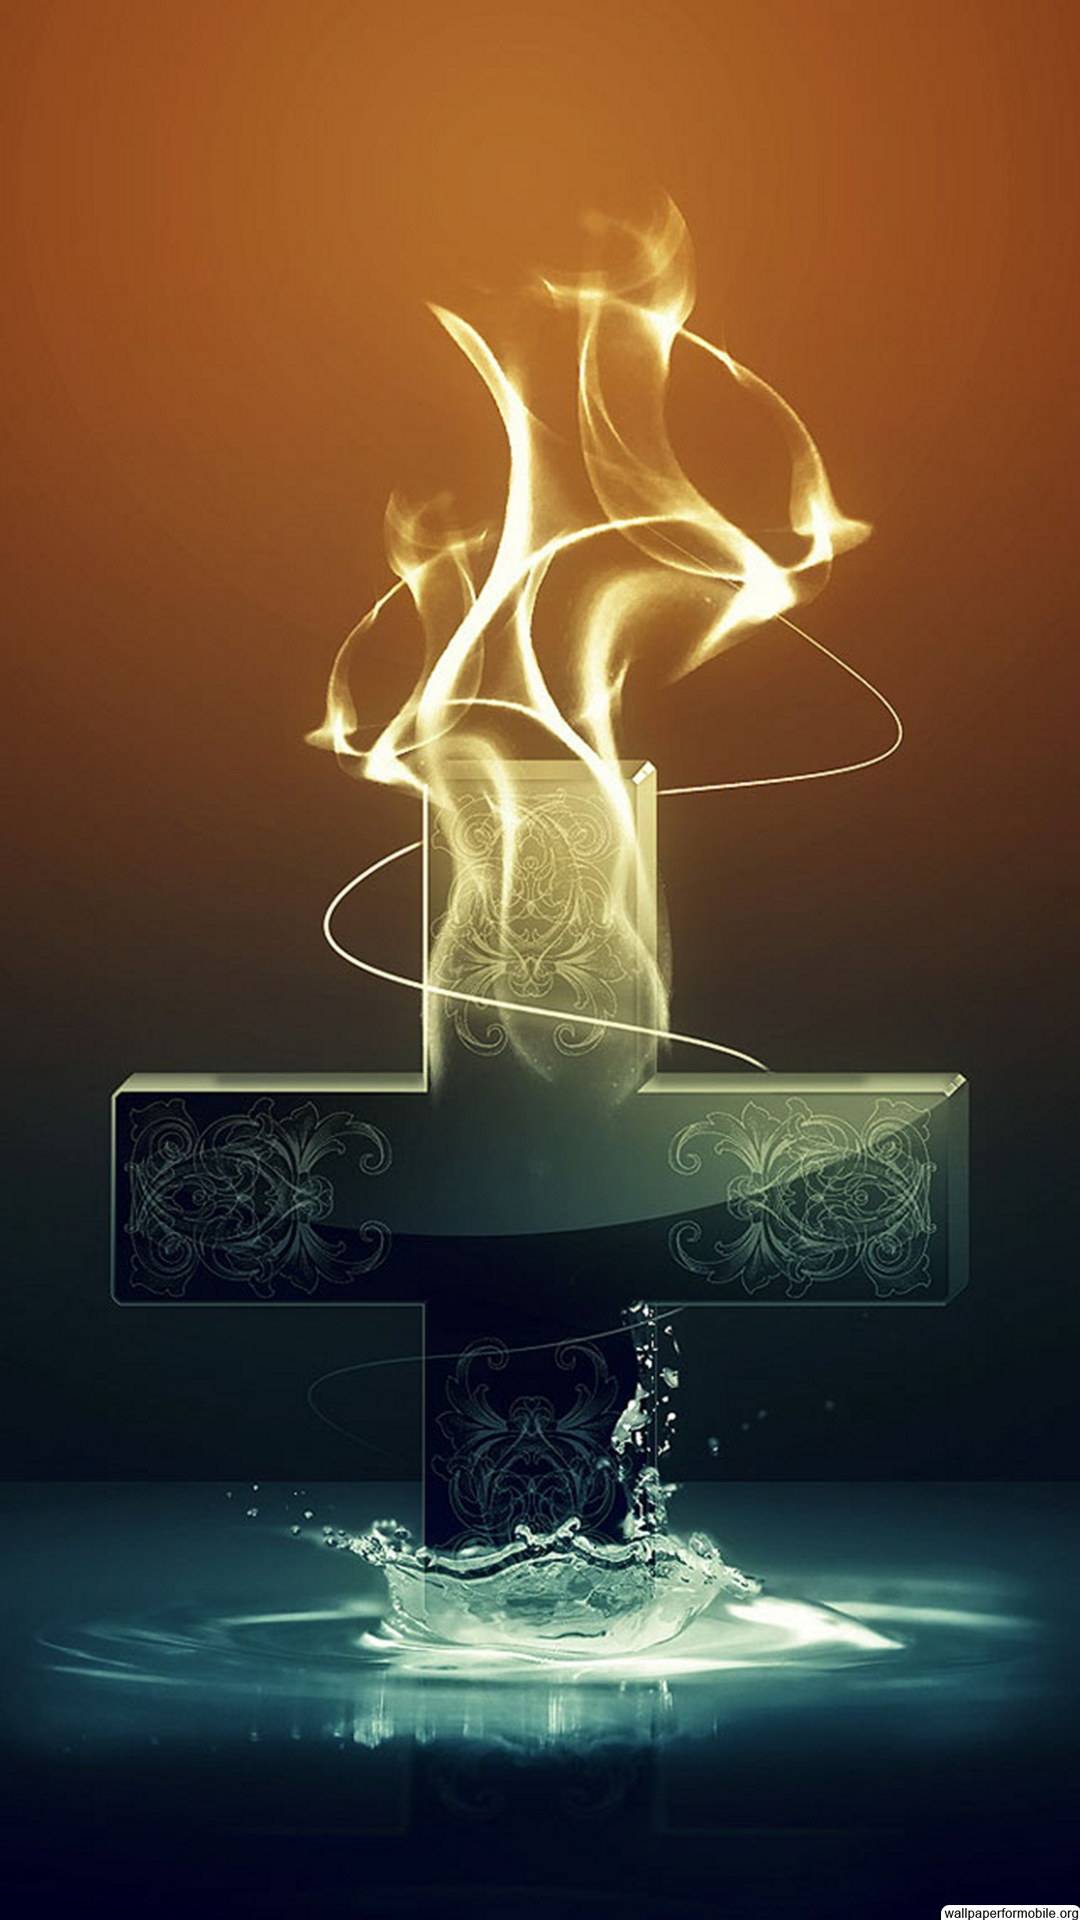 Cool Christian Iphone Wallpapers